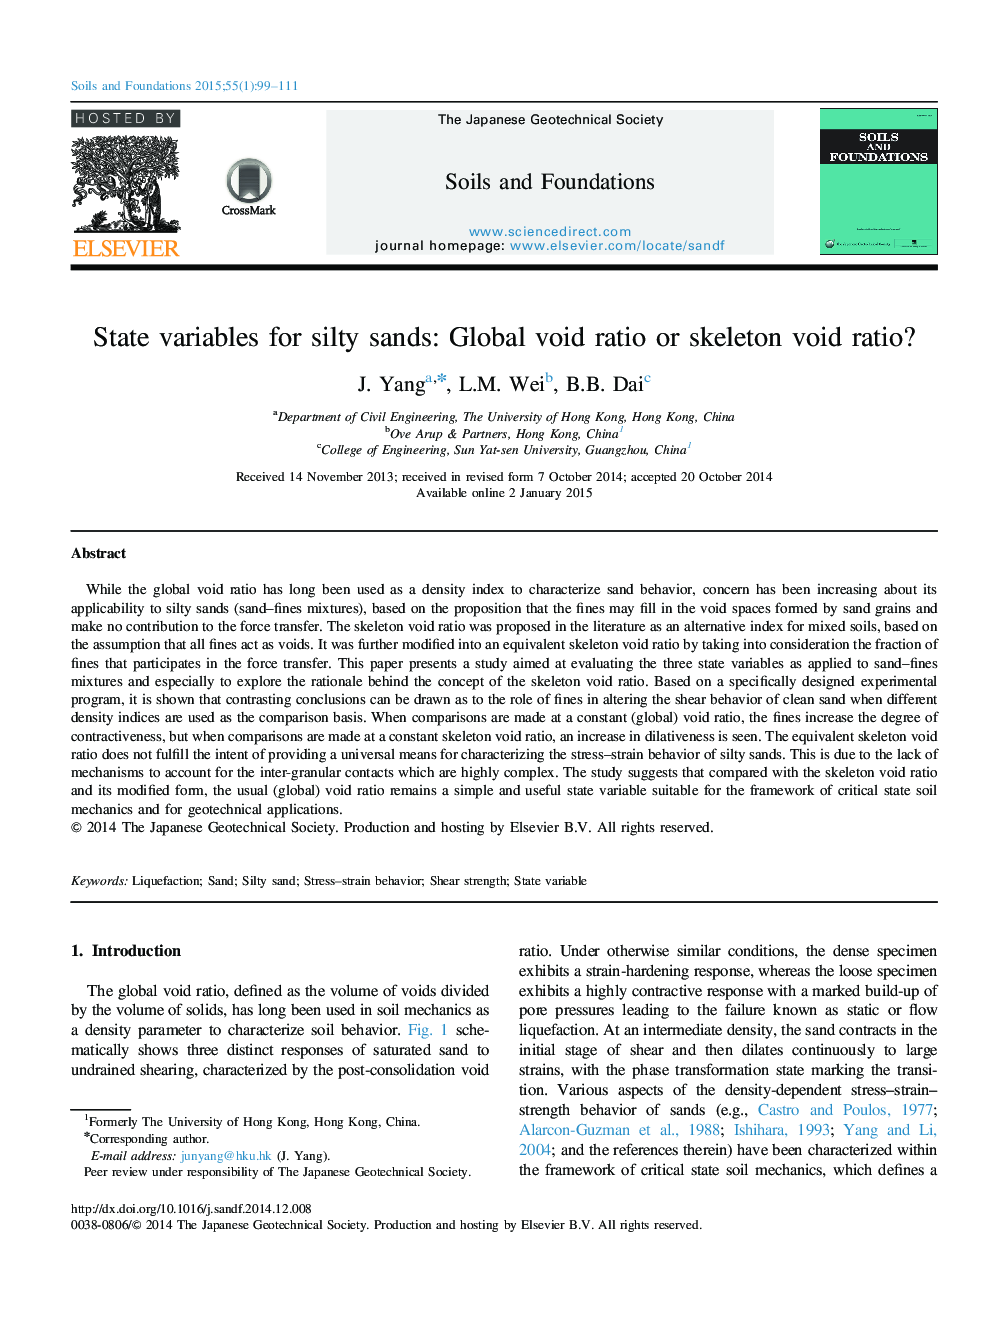 State variables for silty sands: Global void ratio or skeleton void ratio? 